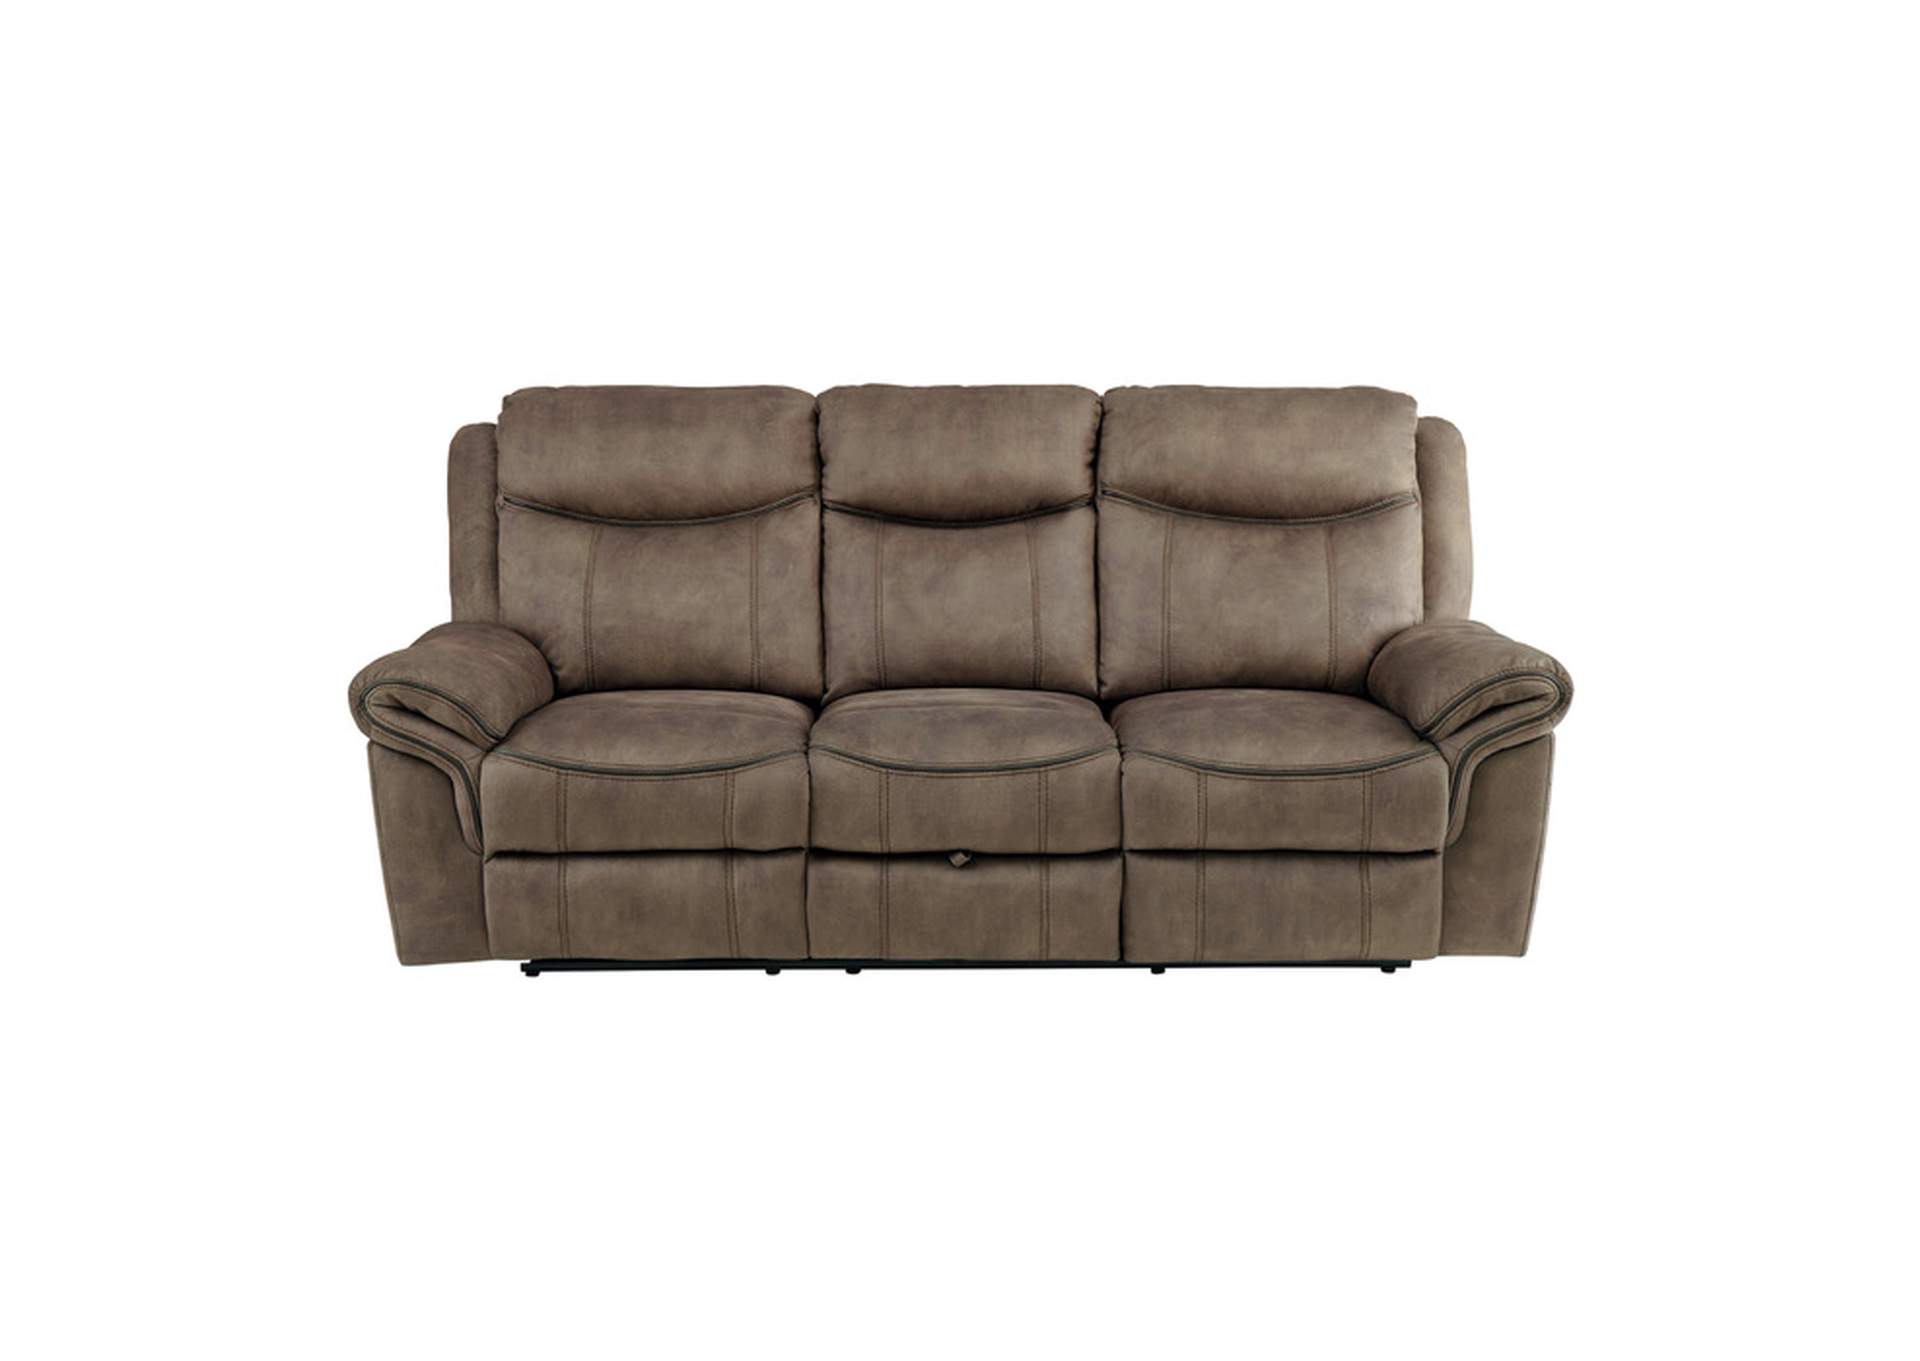 Aram Double Reclining Sofa with Center Drop-Down Cup Holders, Receptacles, Hidden Drawer and USB Ports,Homelegance